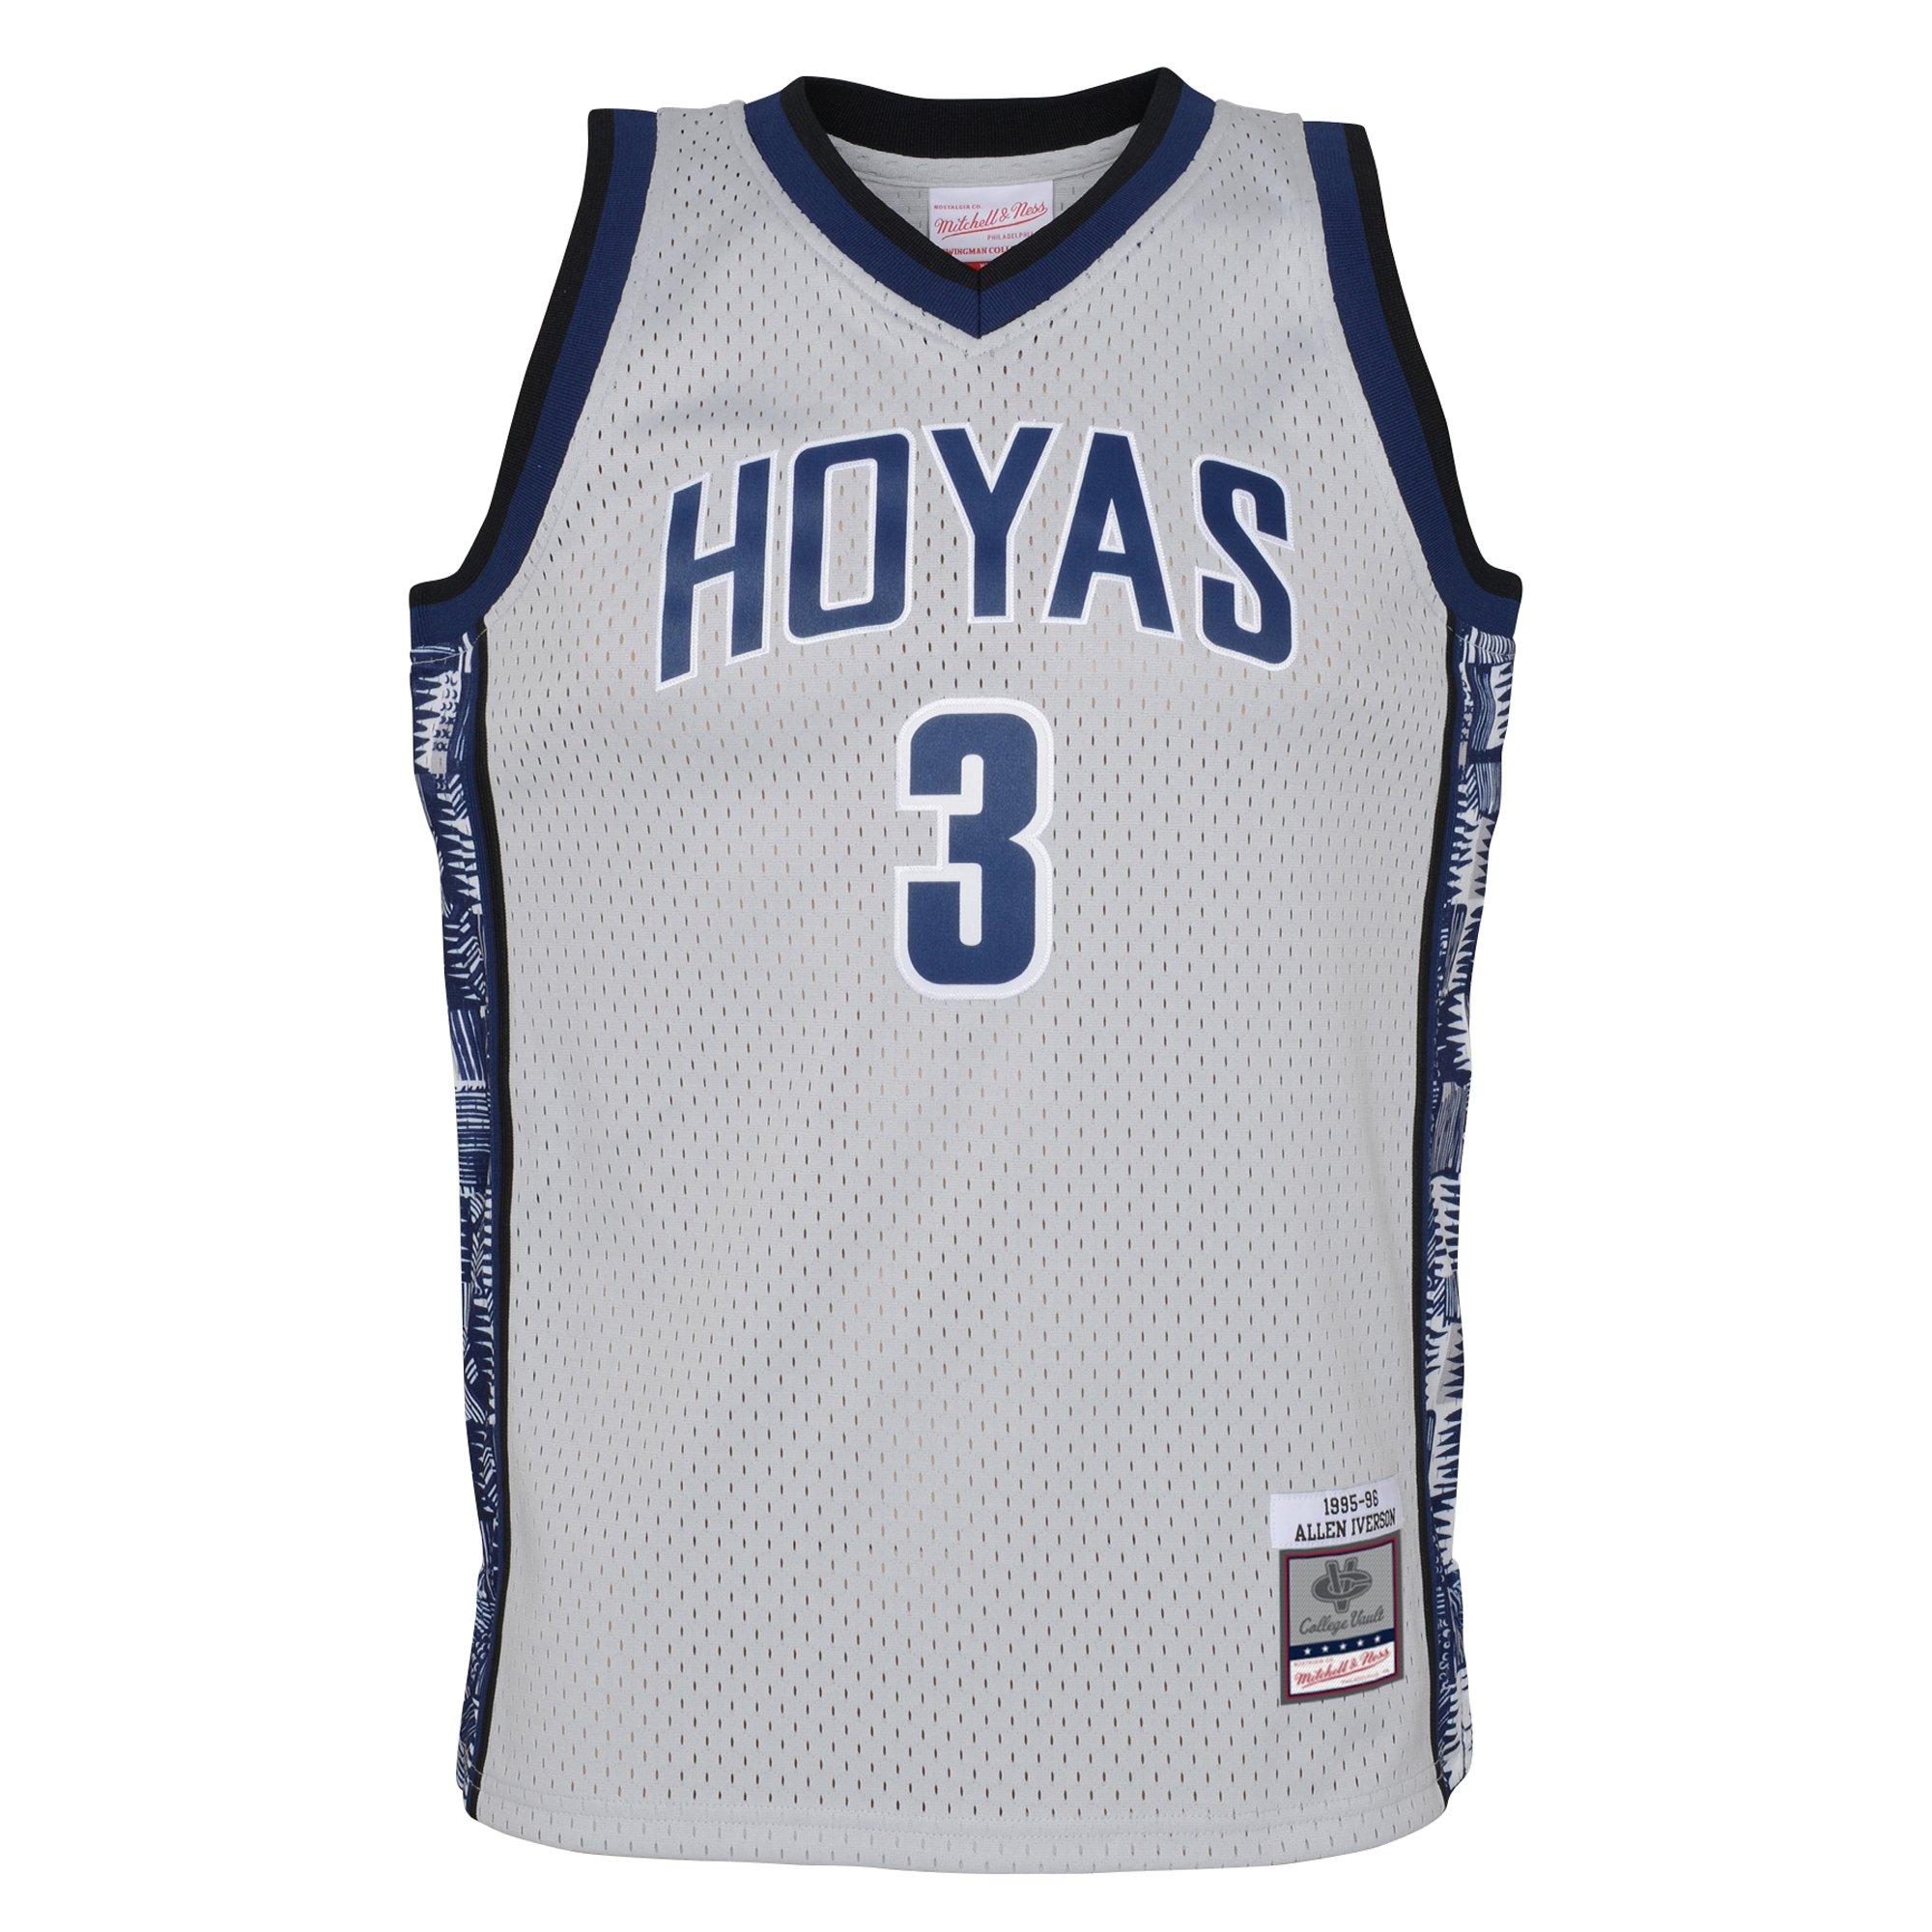 Allen Iverson jersey - Men's Clothing & Shoes - Sycamore, Alabama